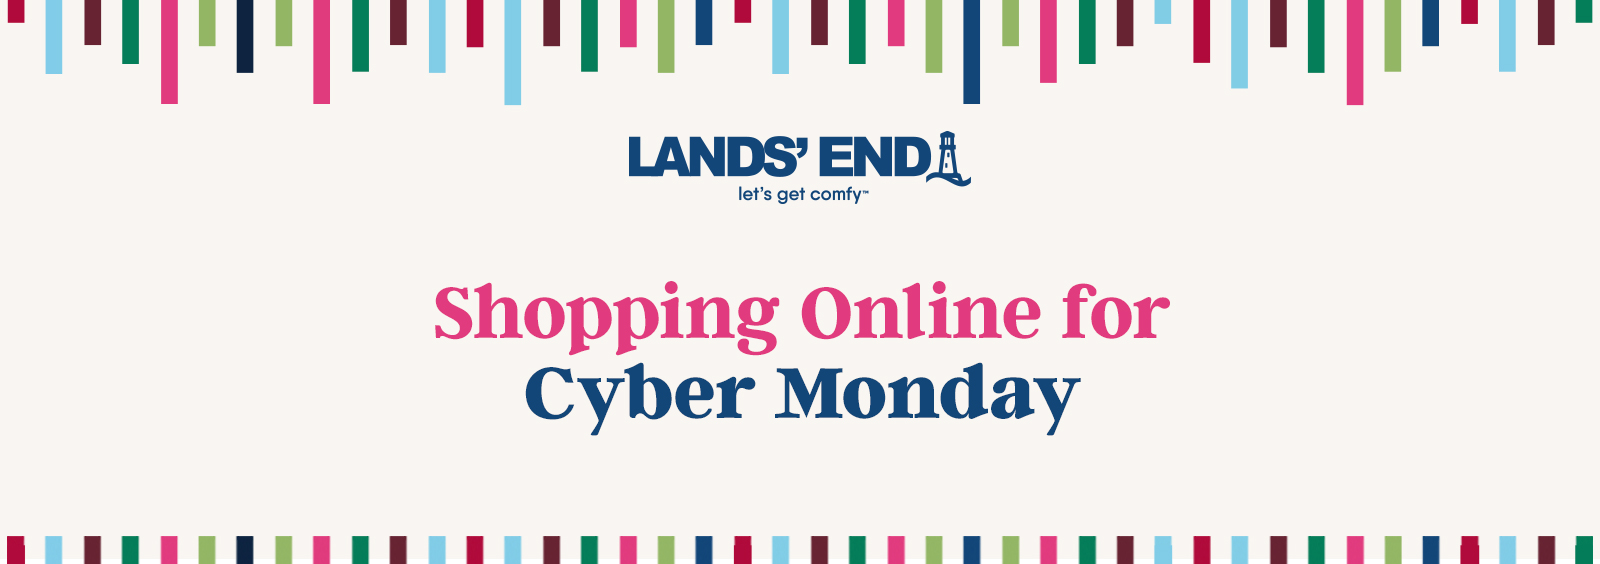 Shopping Online for Cyber Monday